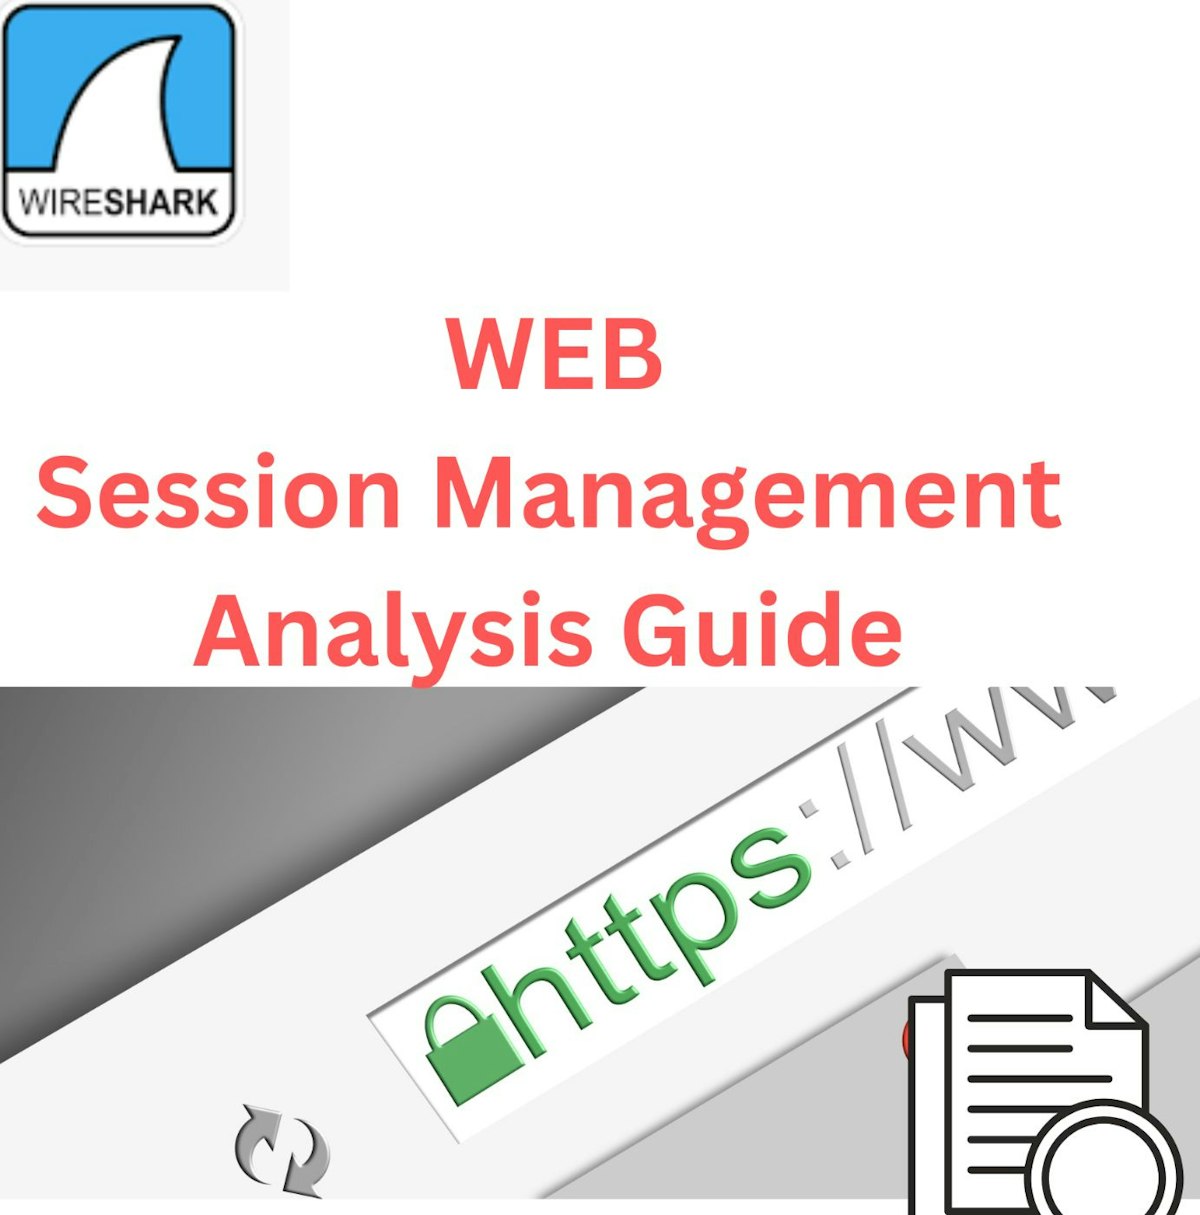 featured image - Reviewing the Security Posture of Web Session Management With Wireshark